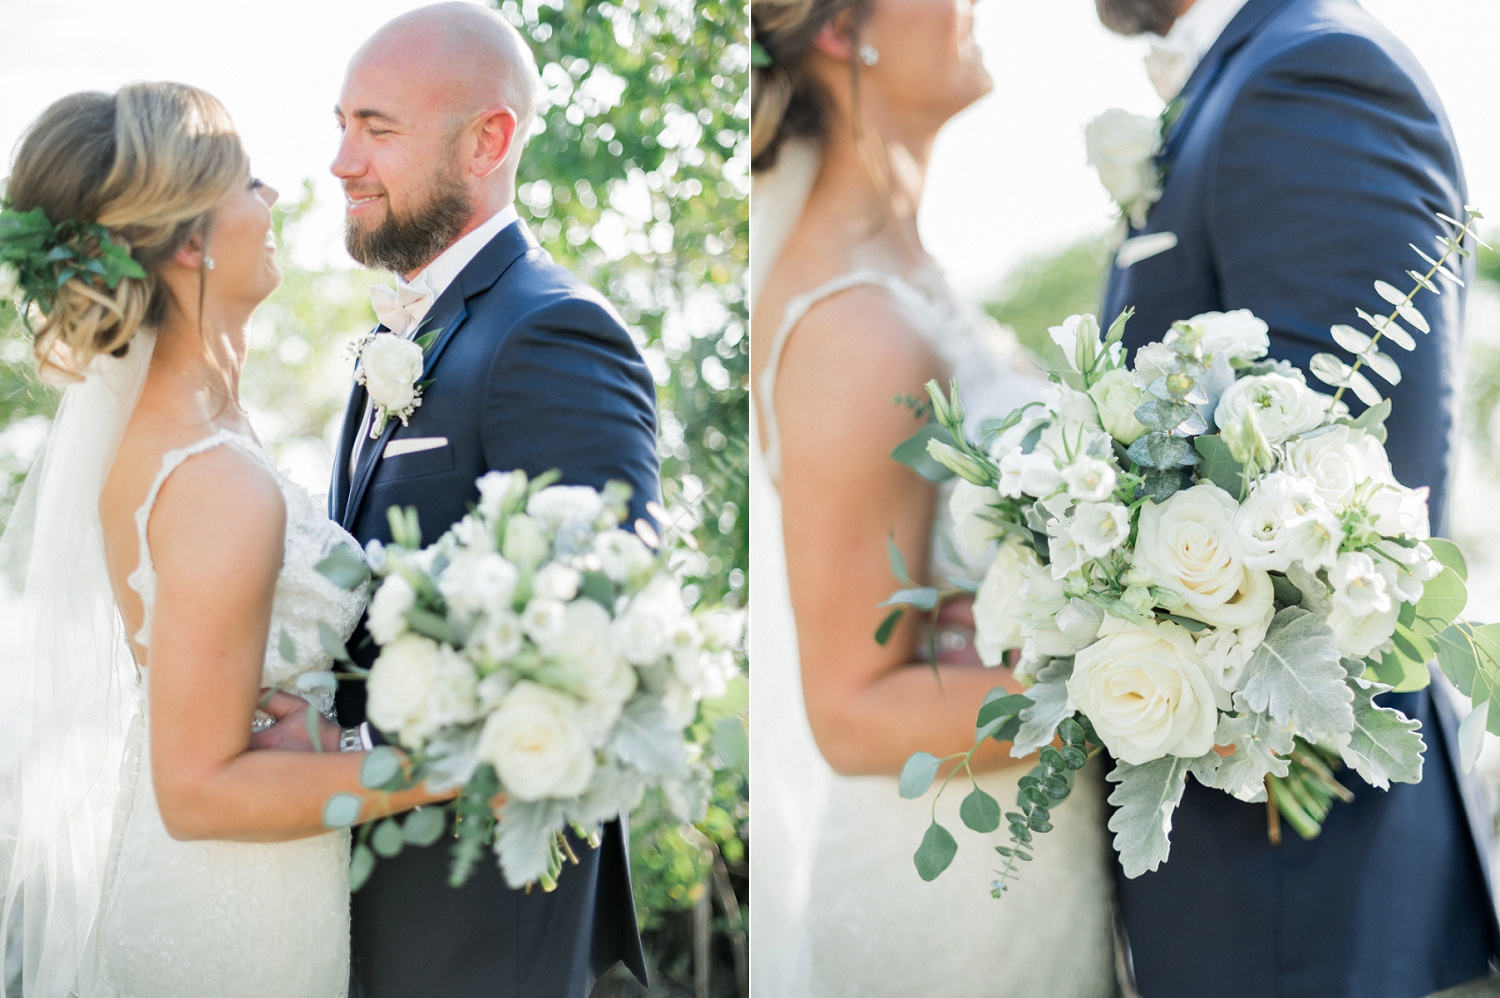 stella york wedding gown, white rose and greenery bouquet, navy grooms attire